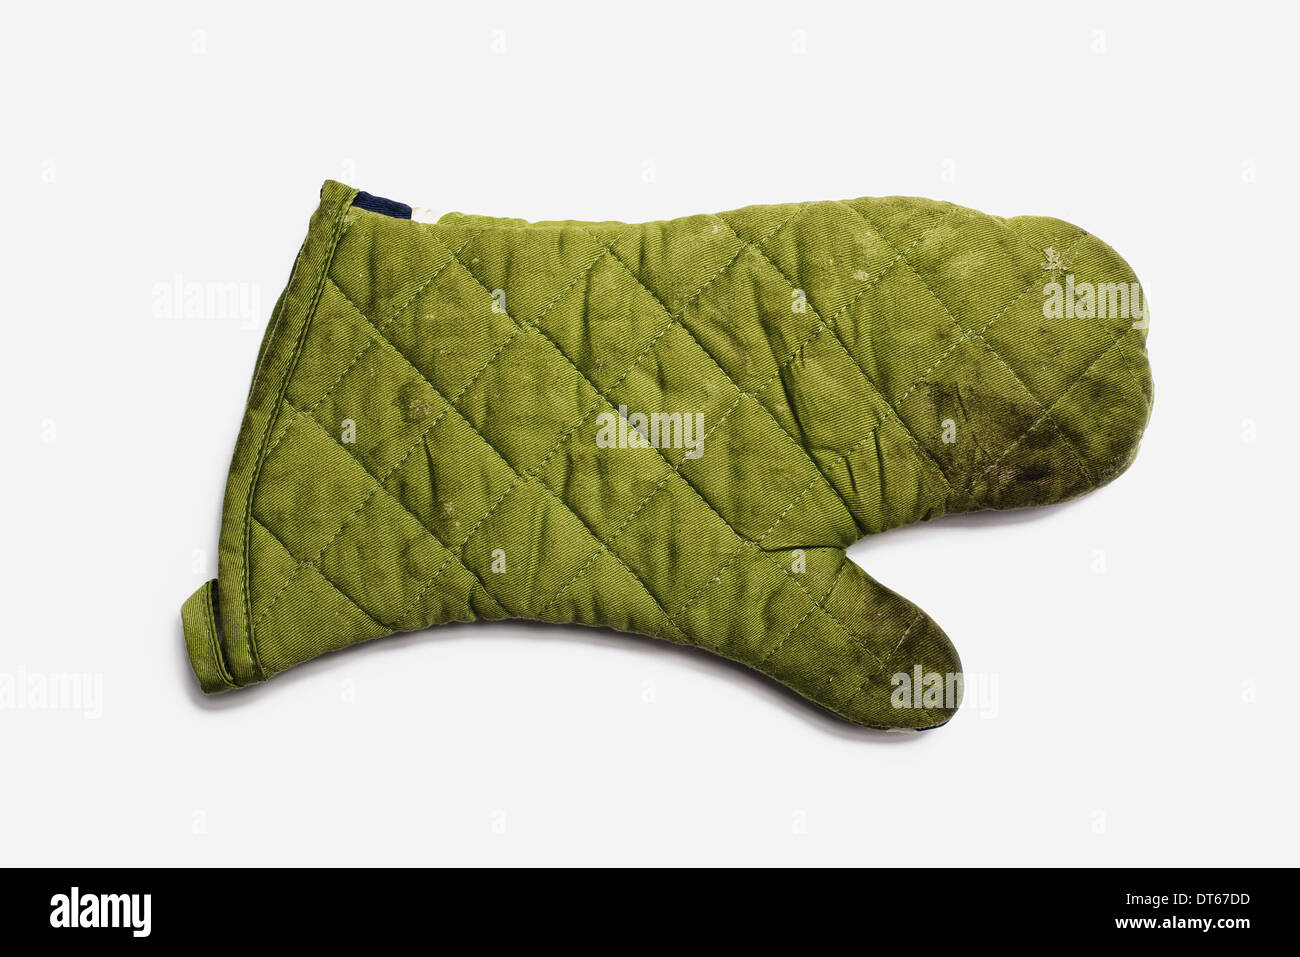 Used Oven Mitt. A quilted padded fabric, green, heat resistant mitt. Stock Photo